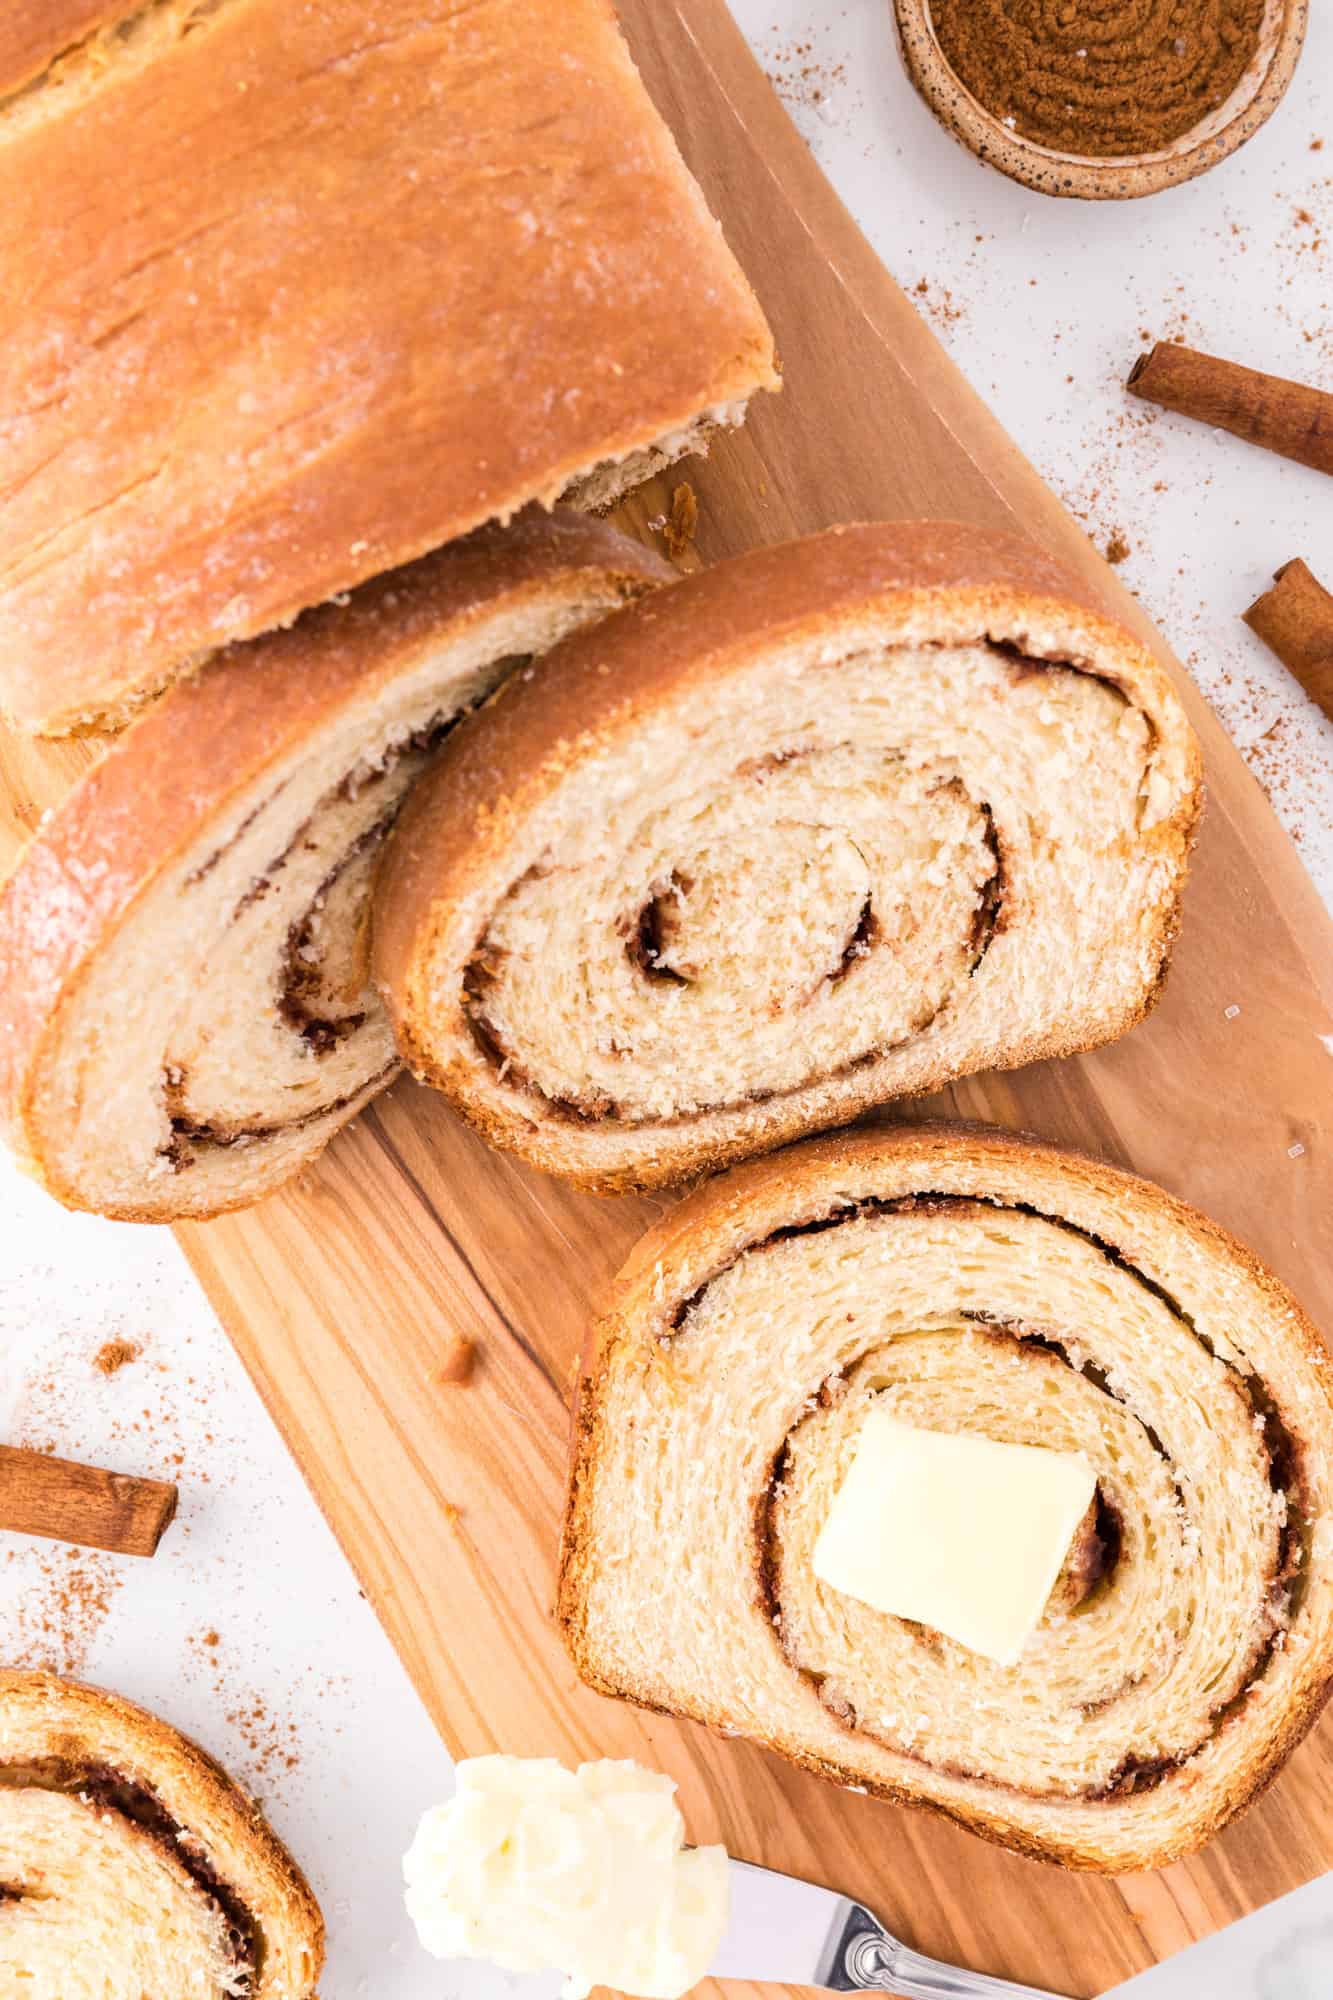 Cinnamon swirl bread sliced and topped with